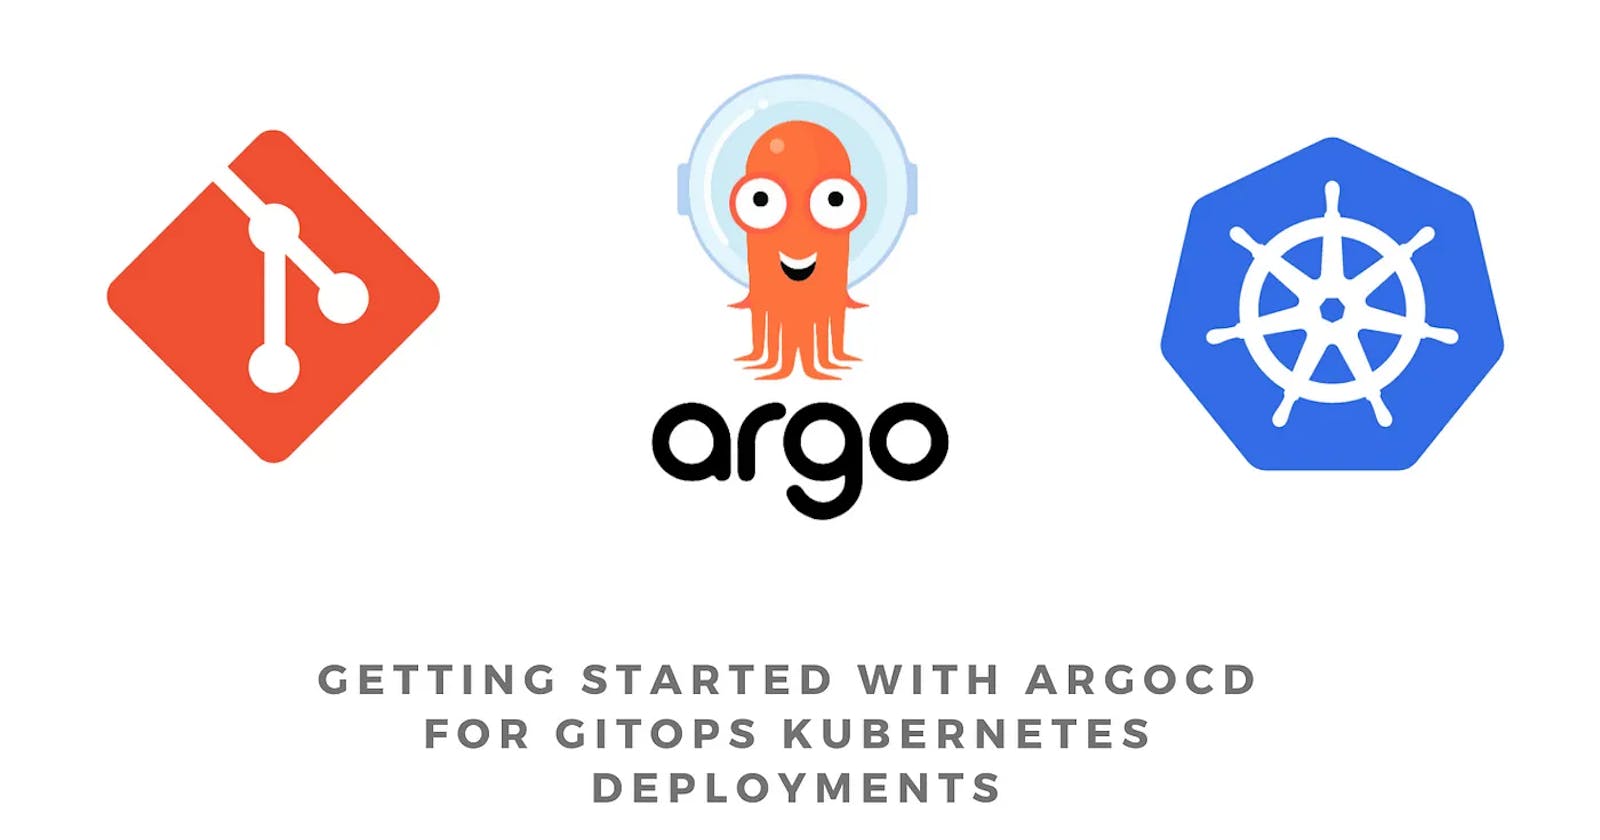 A Beginner's Guide to GitOps, Argo CD, Kubernetes, and Helm Charts